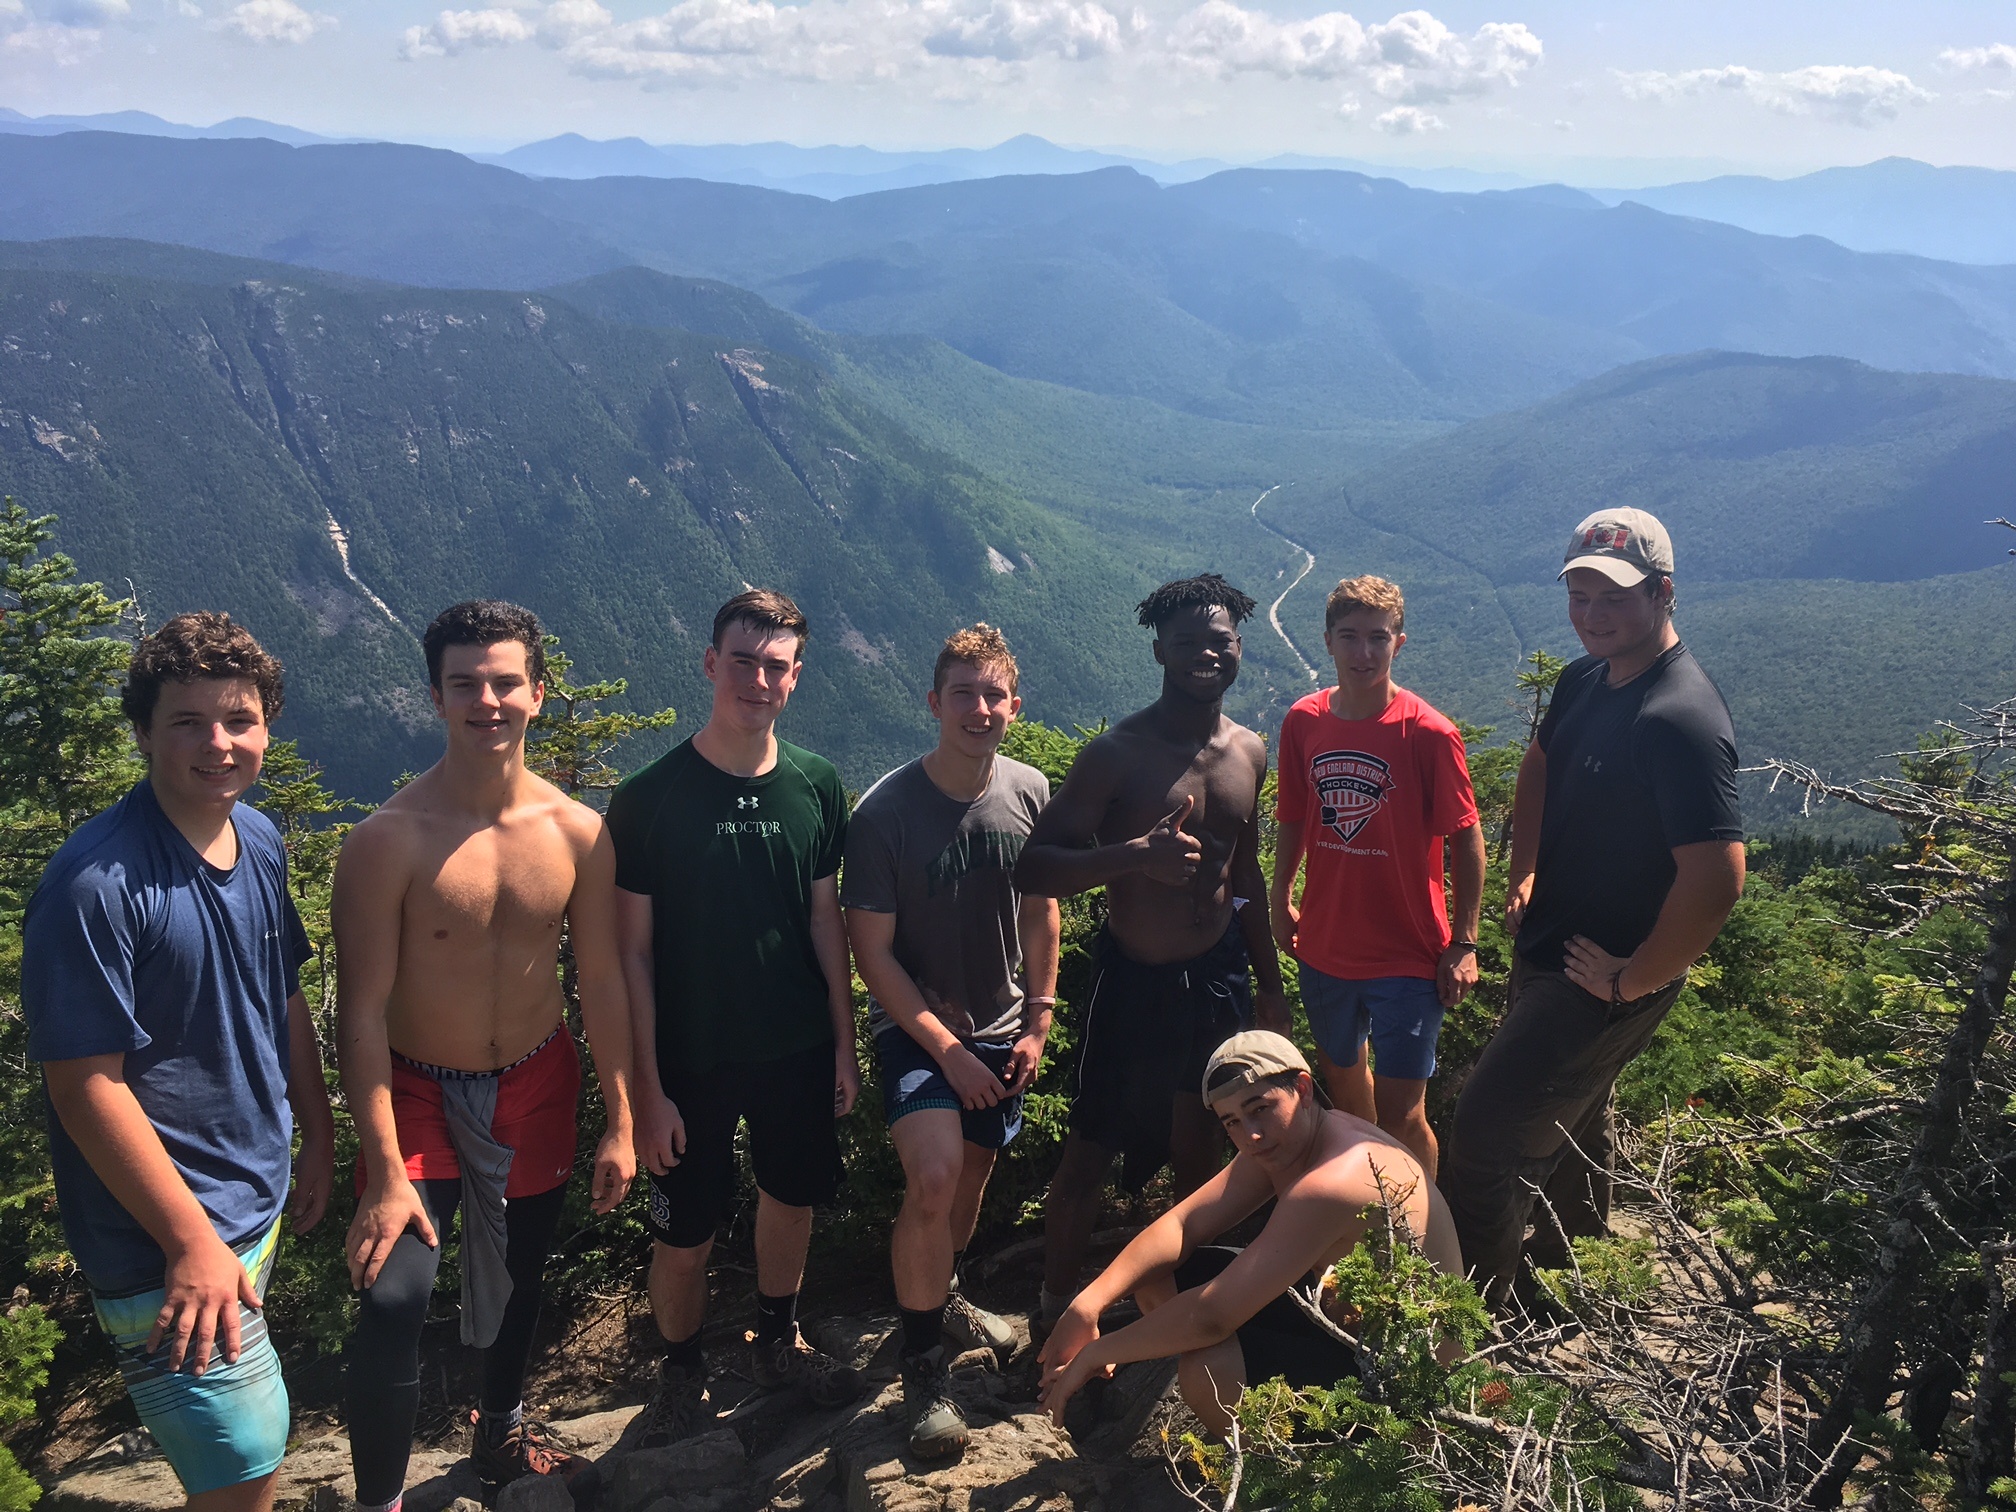 Proctor Academy Wilderness Orientation Experiential Learning